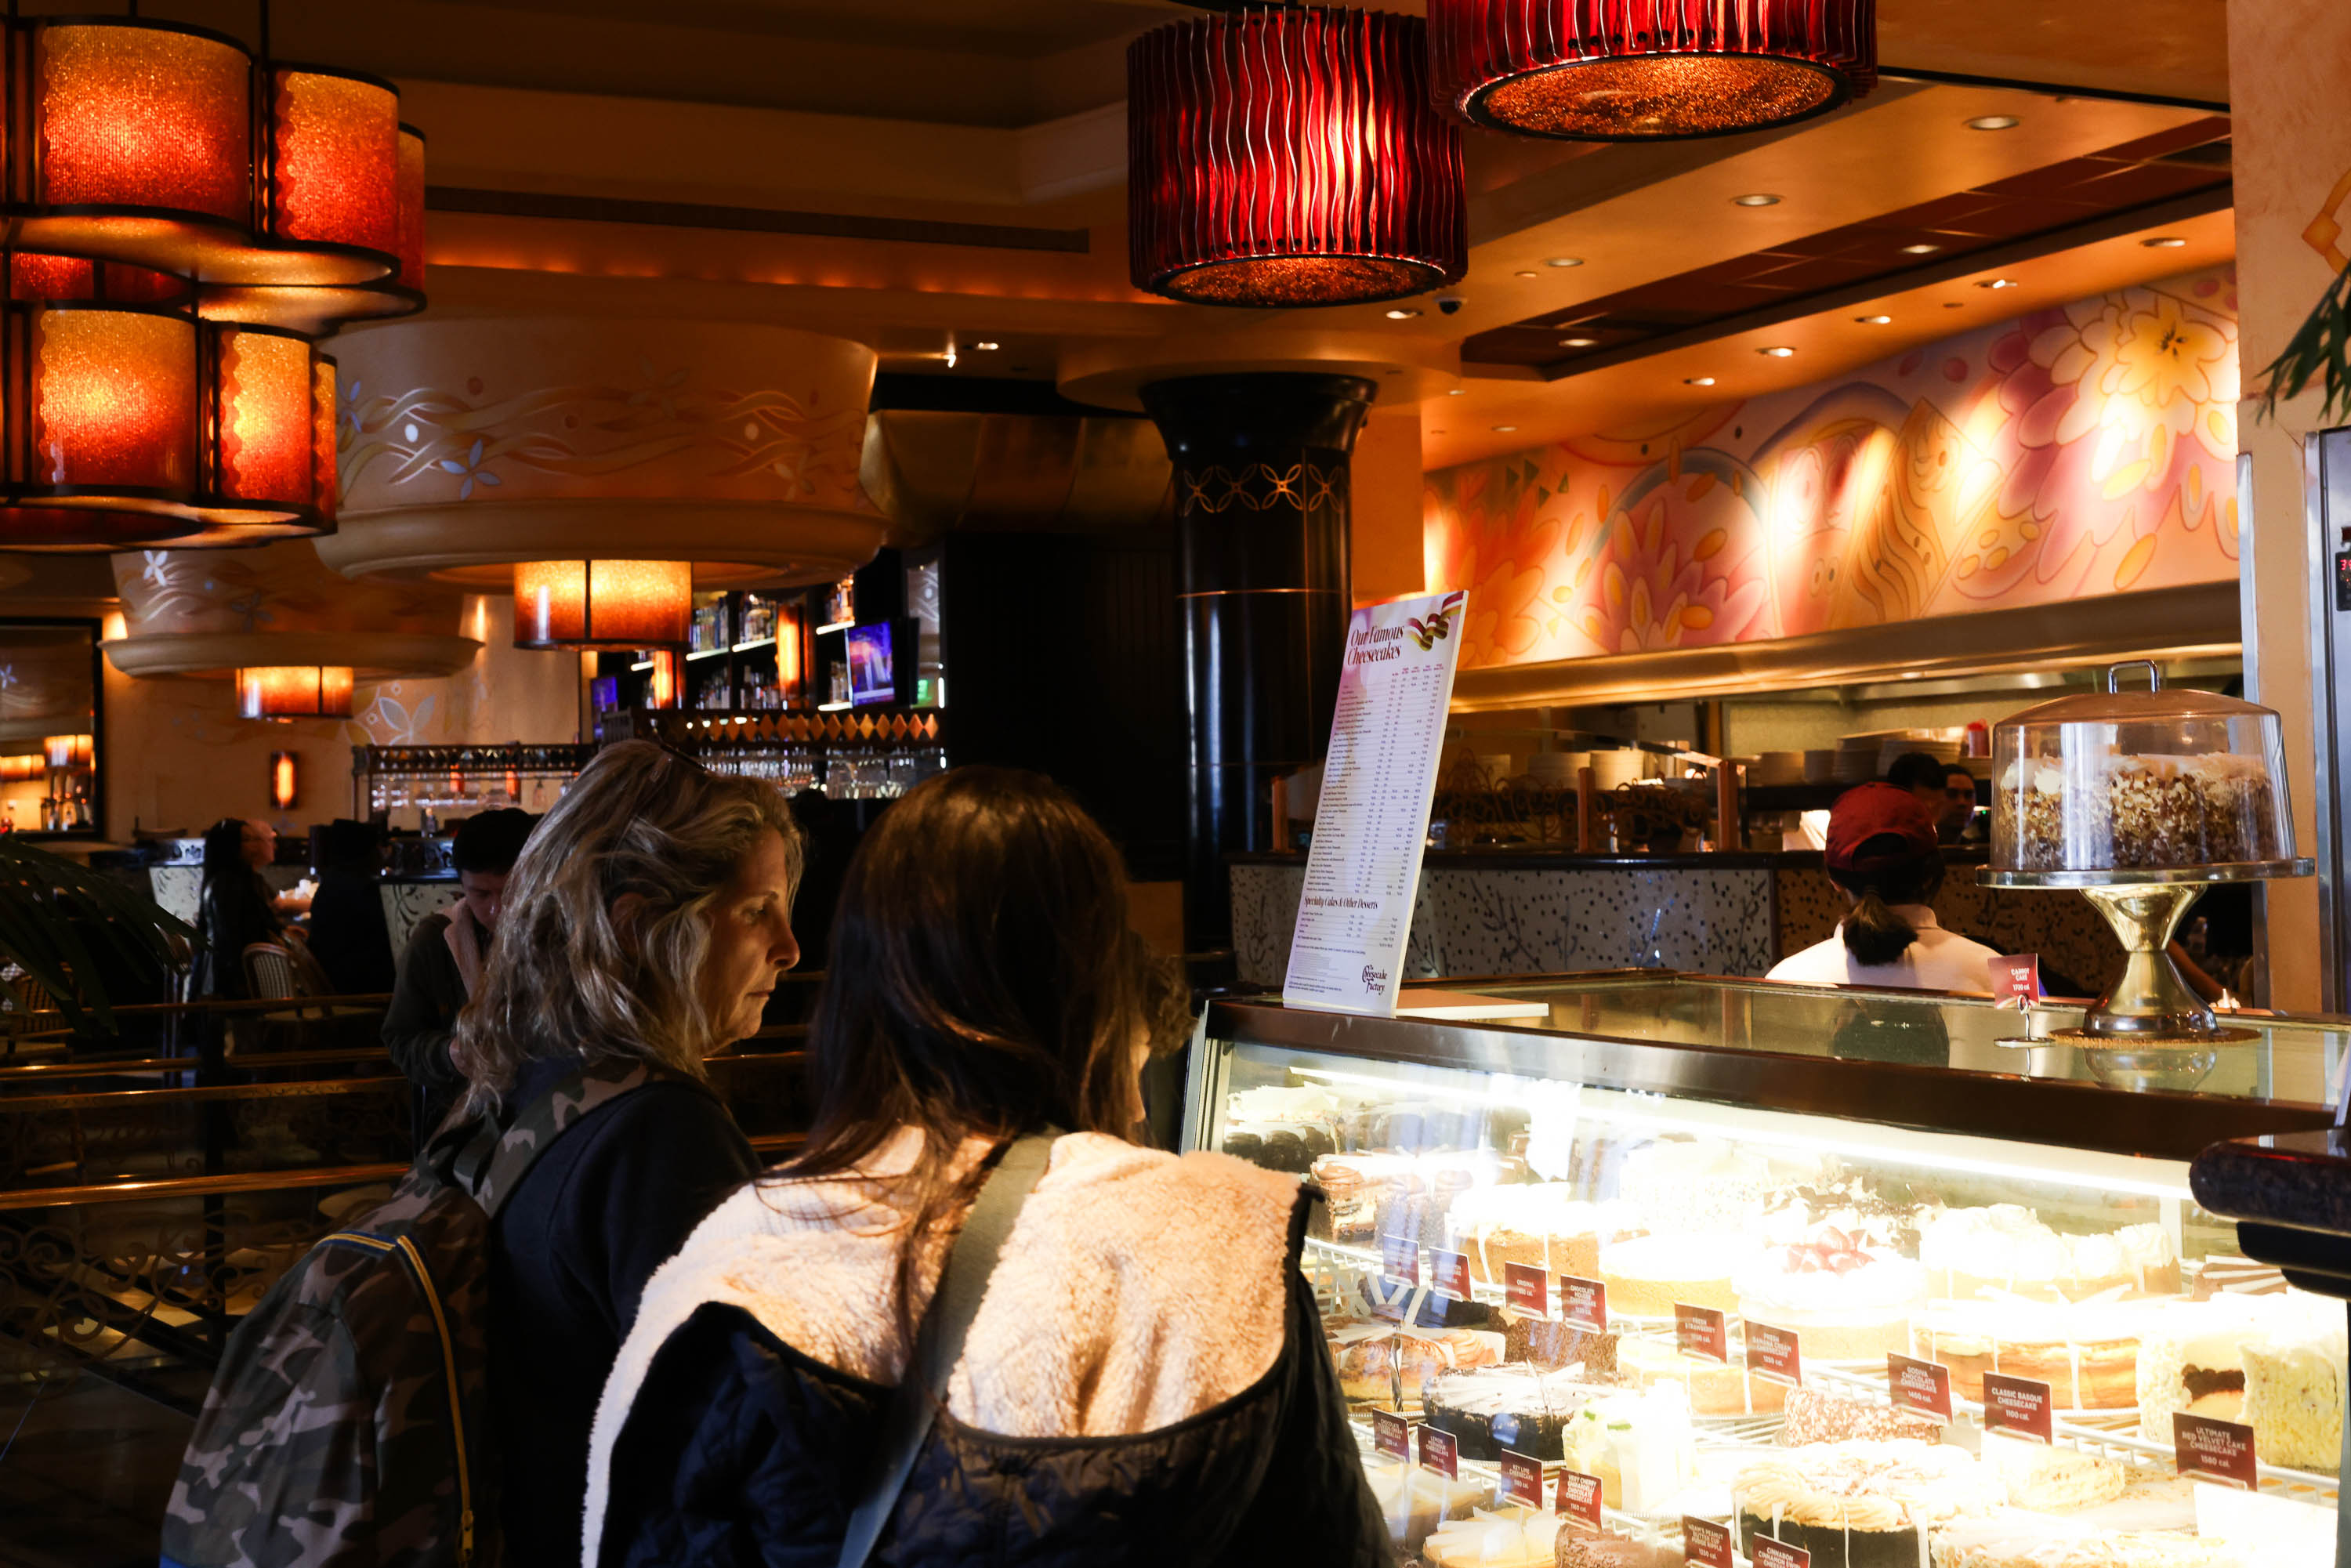 Two people gaze at a brightly-lit pastry display in a cozy bakery with warm ambient lighting.